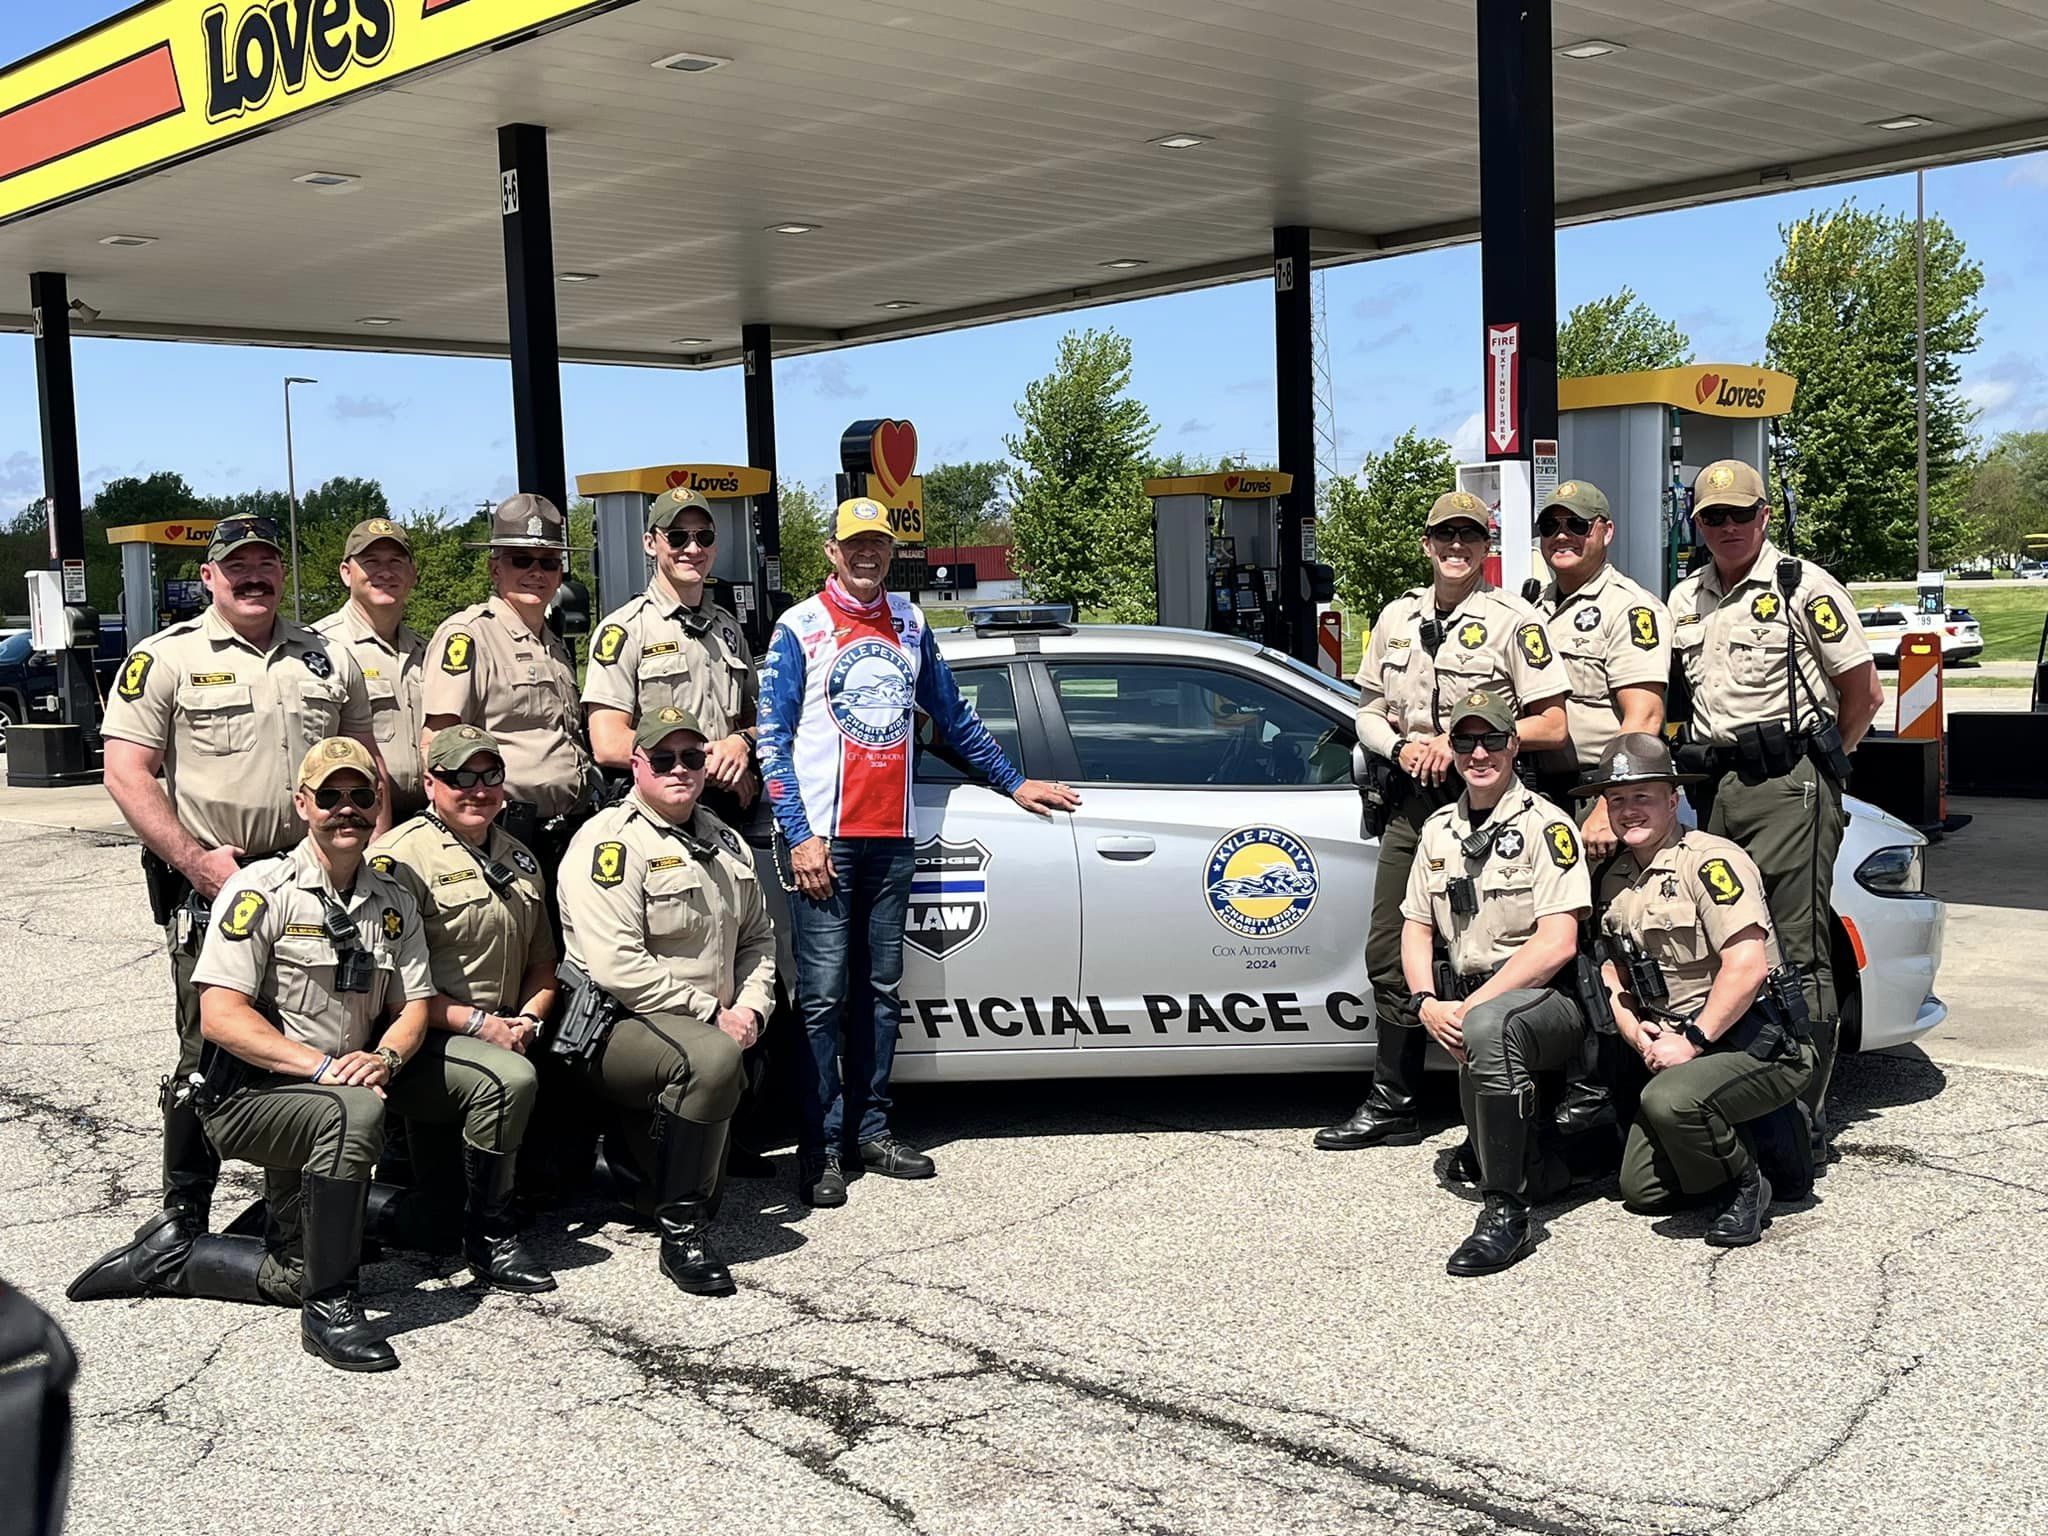 NASCAR racing legends makes a pit stop in LeRoy